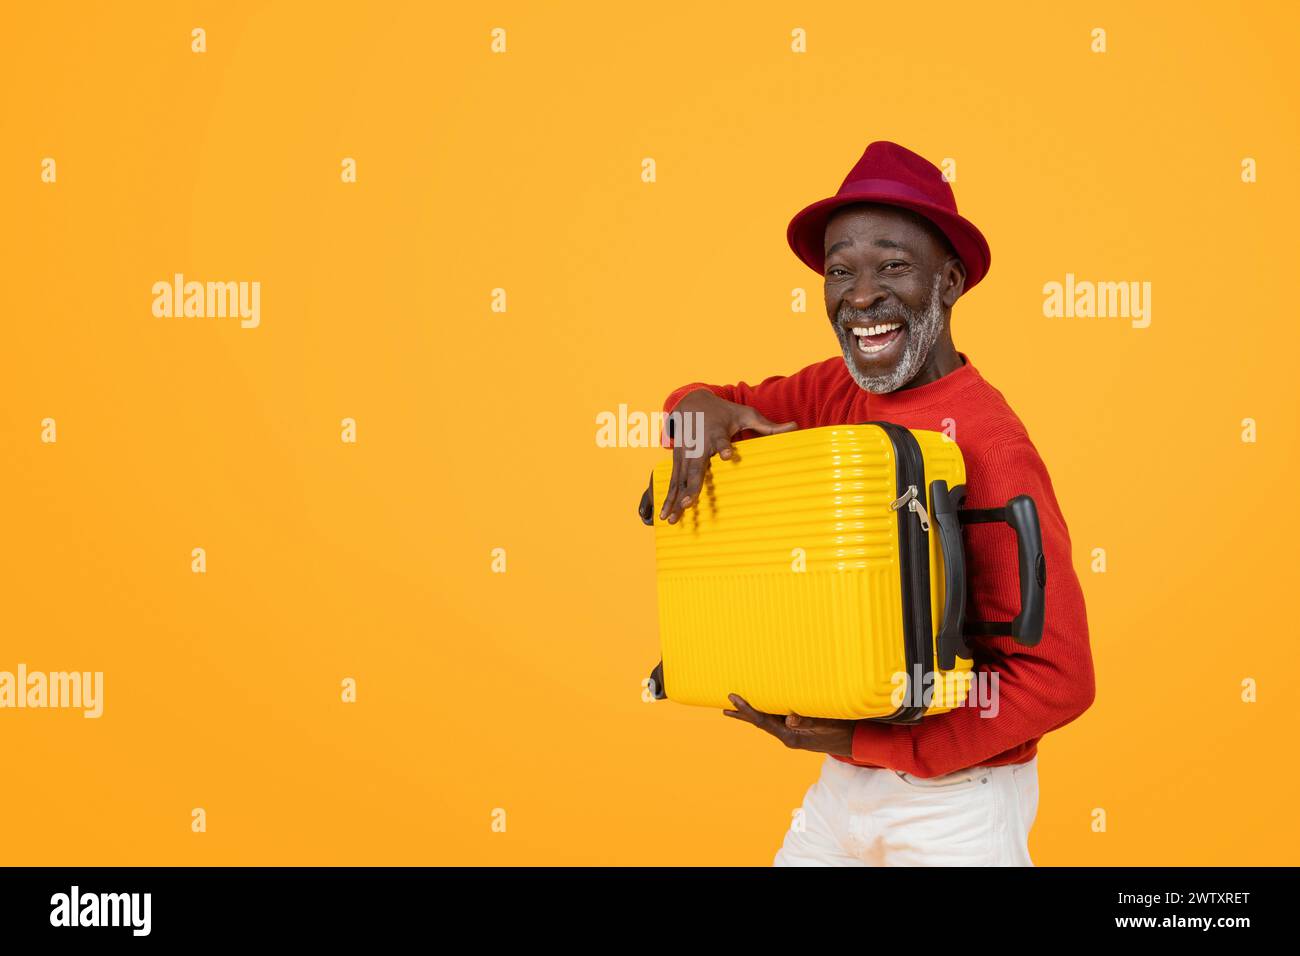 Cheerful senior black man wearing a red hat and sweater, holding a ...